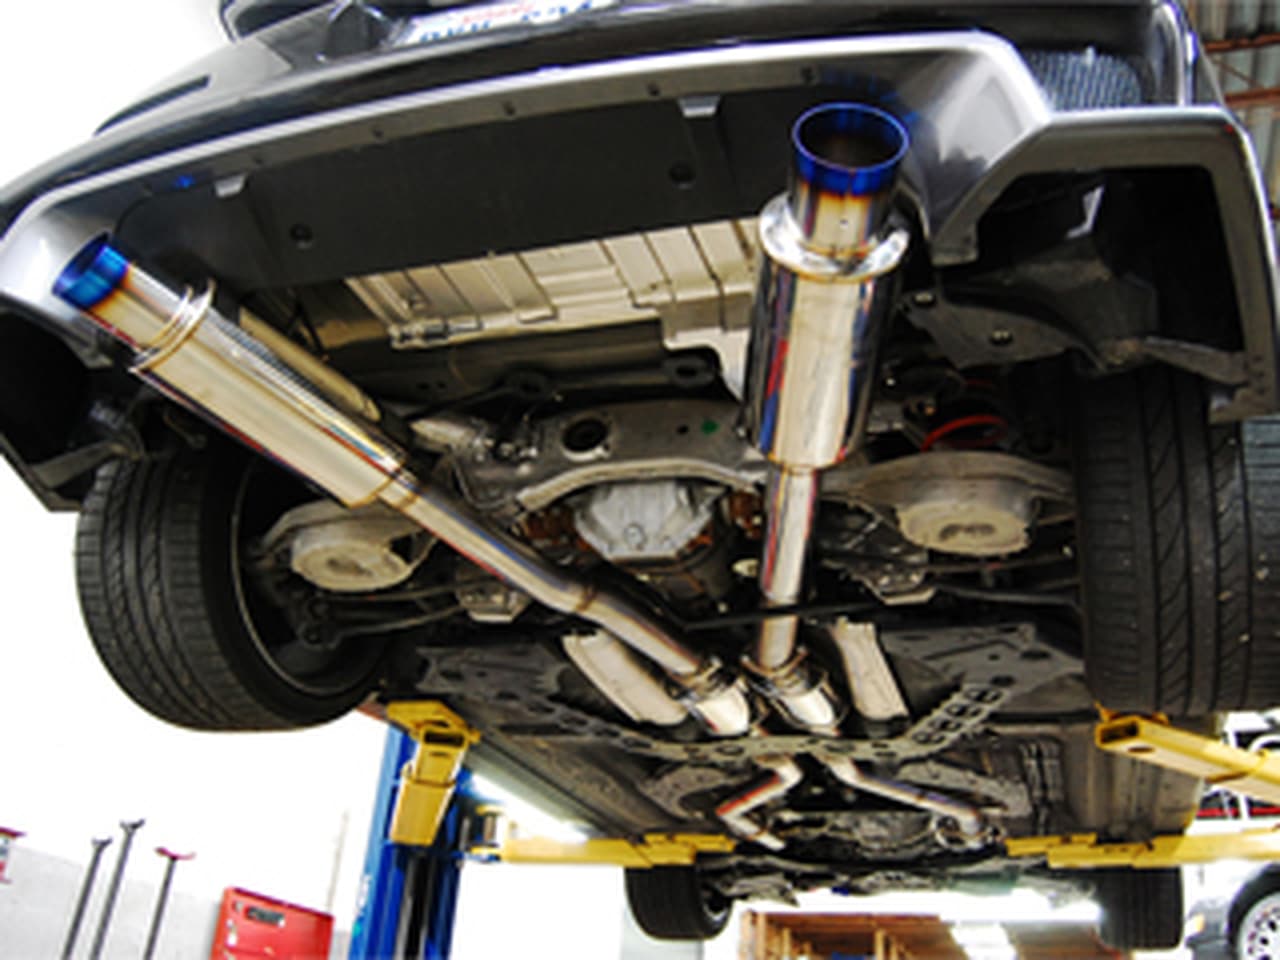 The Best Nissan 350Z Z33 Exhaust Systems Of 2020 - Project Car Life